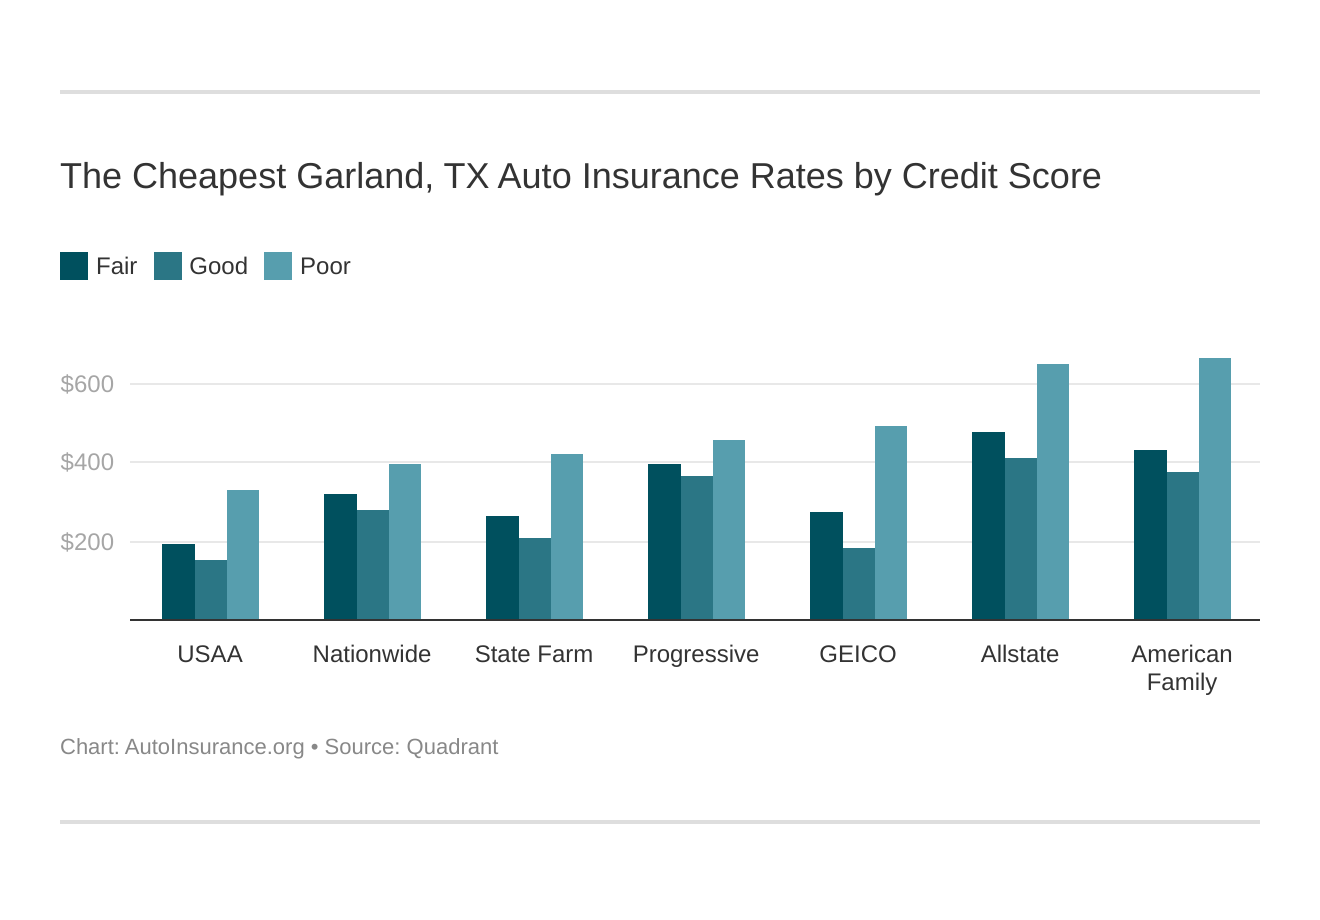 The Cheapest Garland, TX Auto Insurance Rates by Credit Score